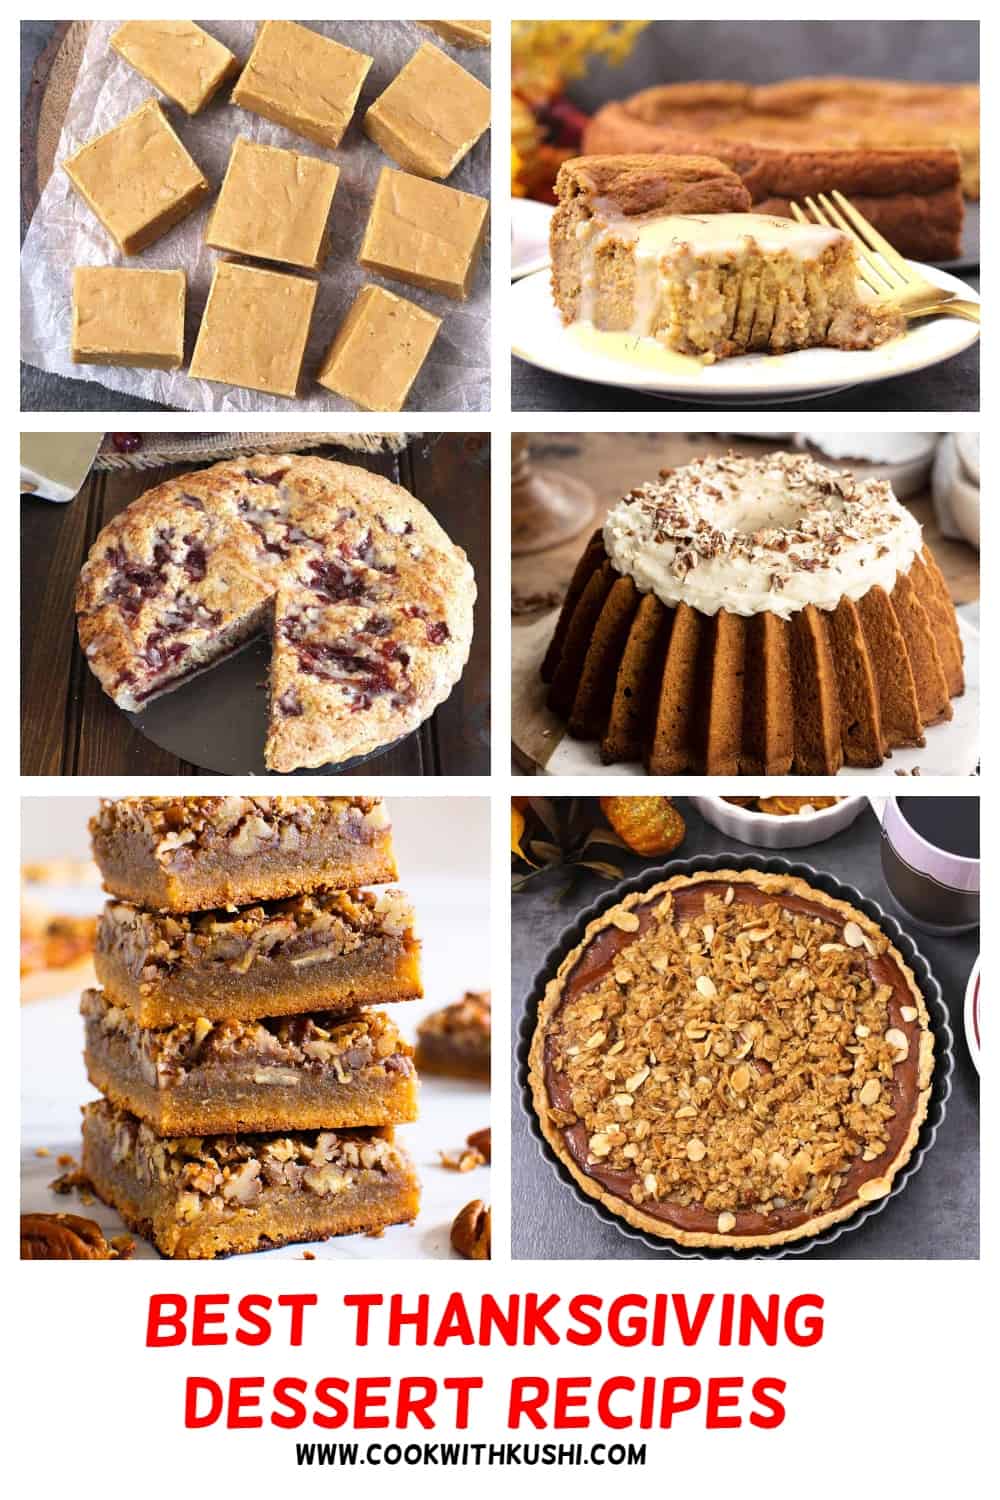 Best Thanksgiving dessert recipes from pies, tarts,cakes, cookies, pudding, cheesecake, holiday themed desserts